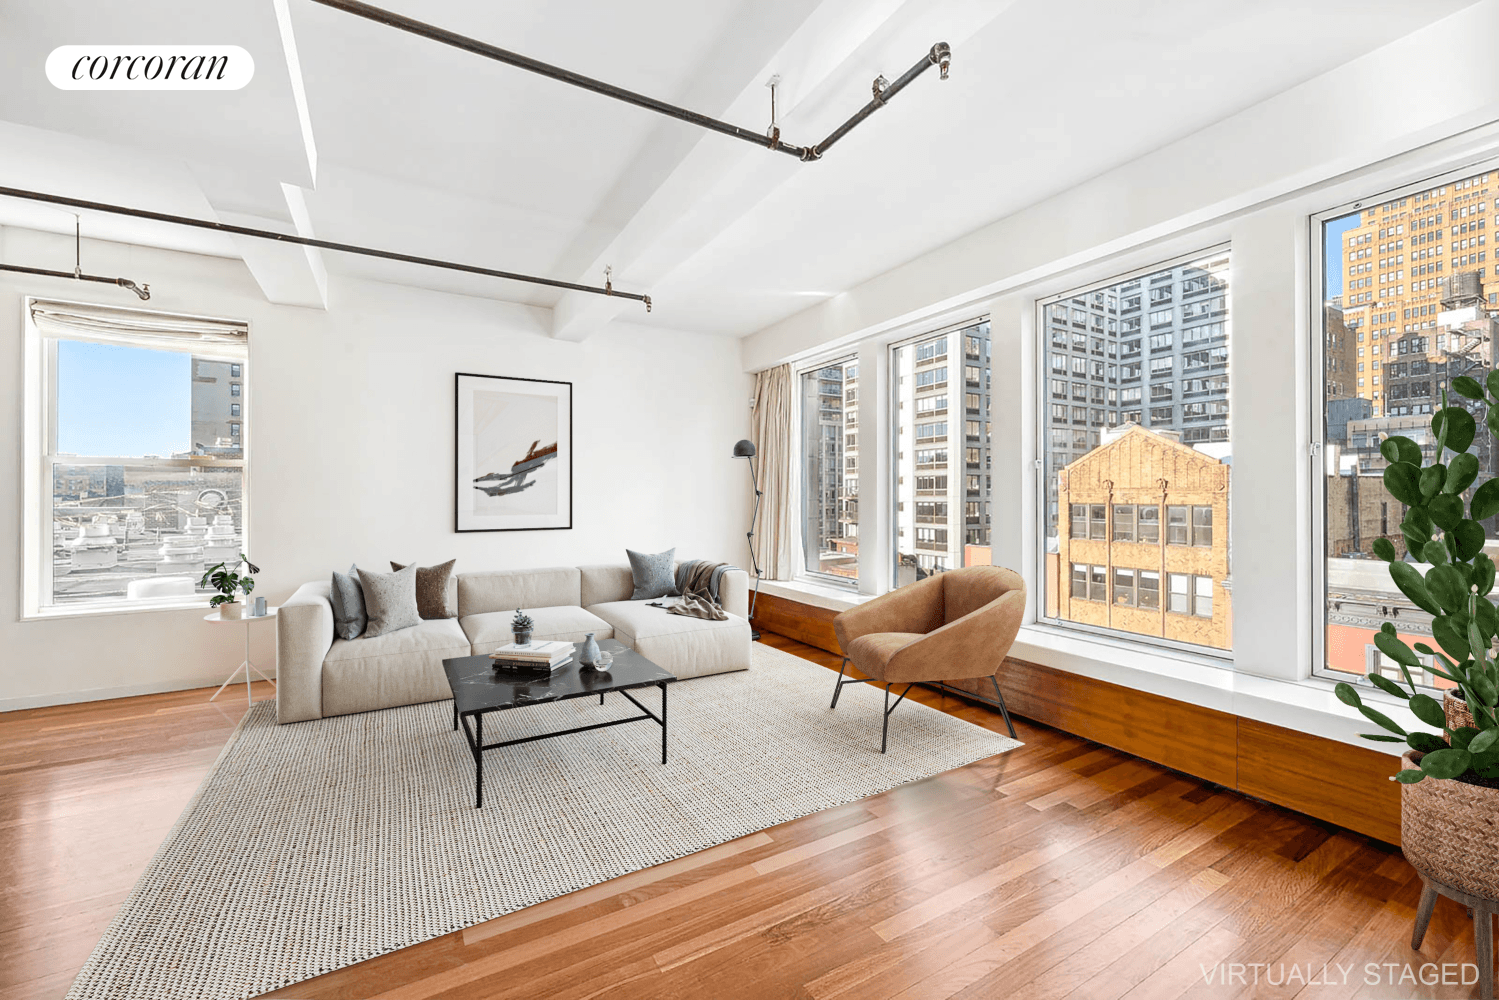 At the intersection of Prime Chelsea and the Flatiron District resides an 1865sqft 3 bedroom penthouse loft condominium with 1400sqft outdoor roof terrace with wide open downtown views and all ...